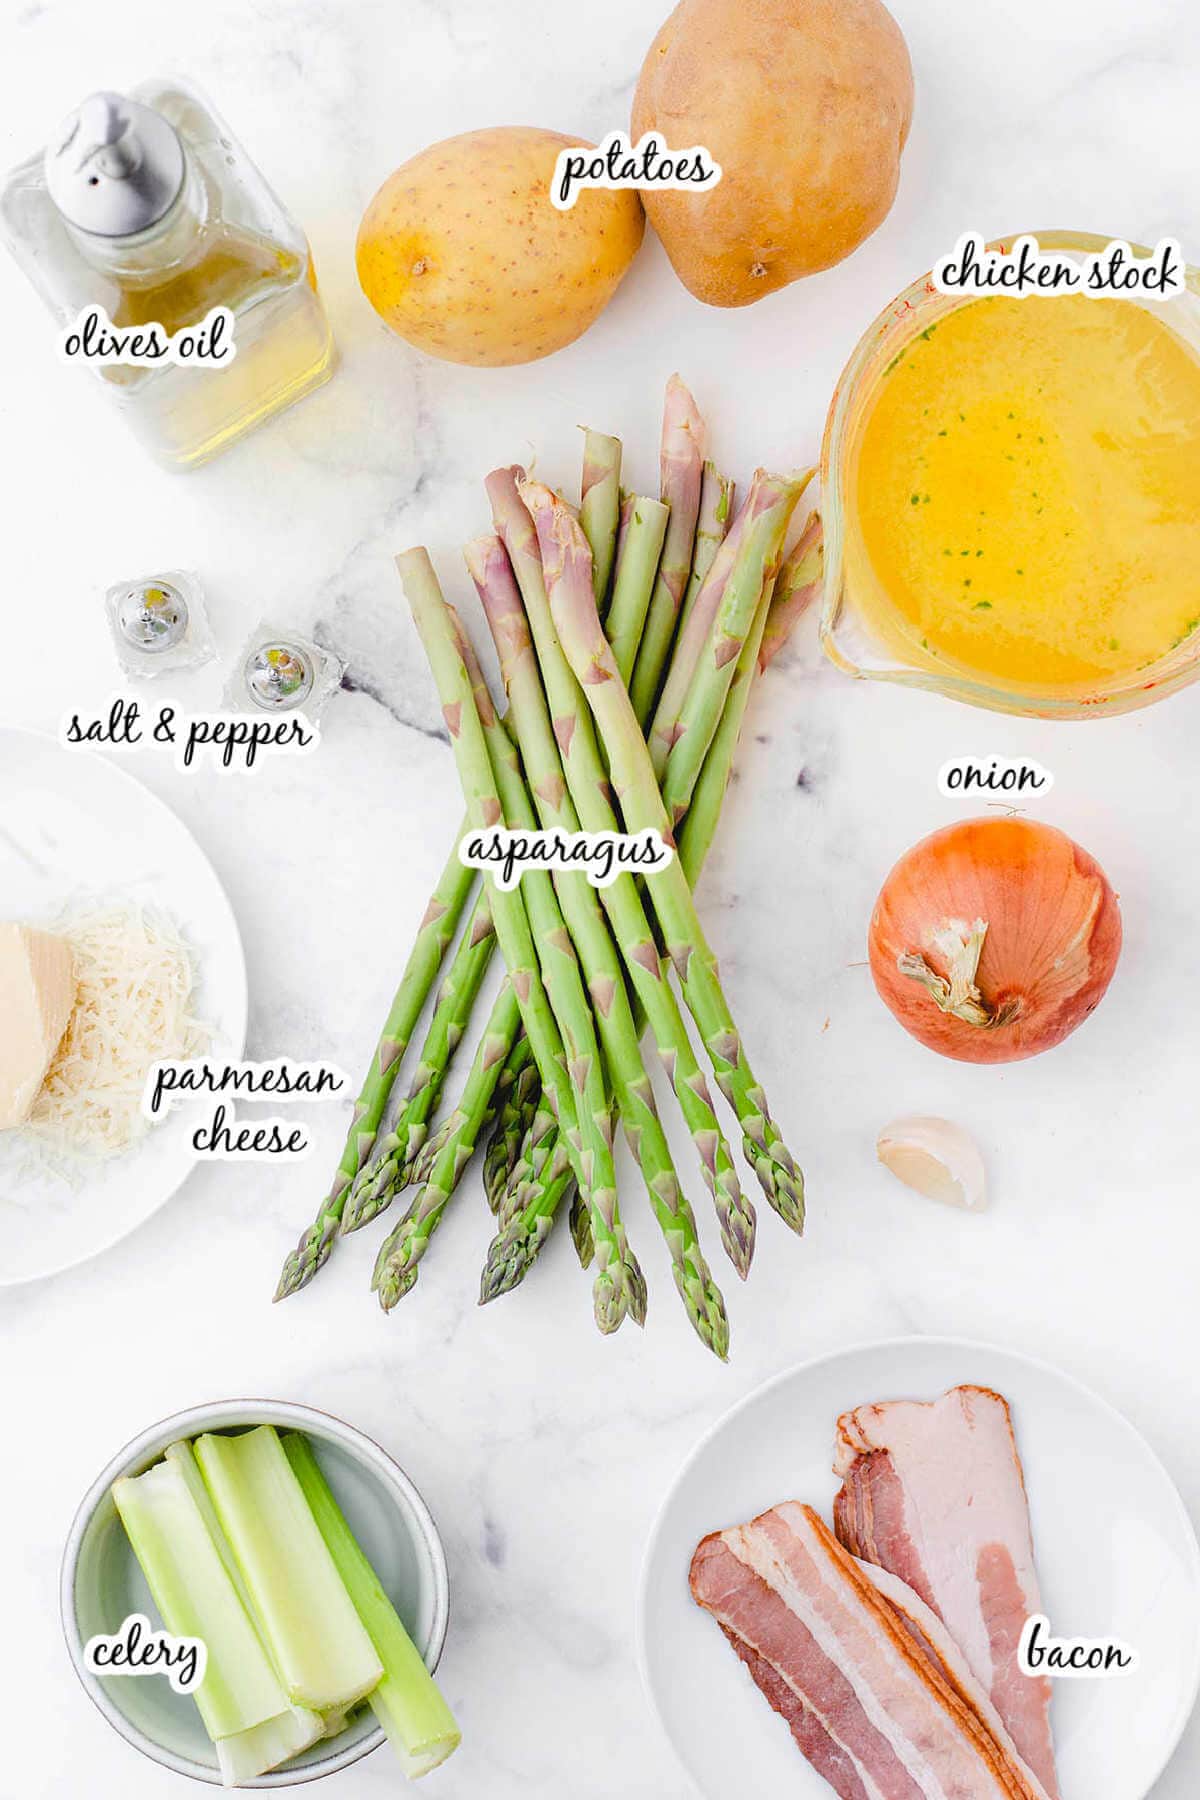 Ingredients to make asparagus soup recipe, with print overlay.